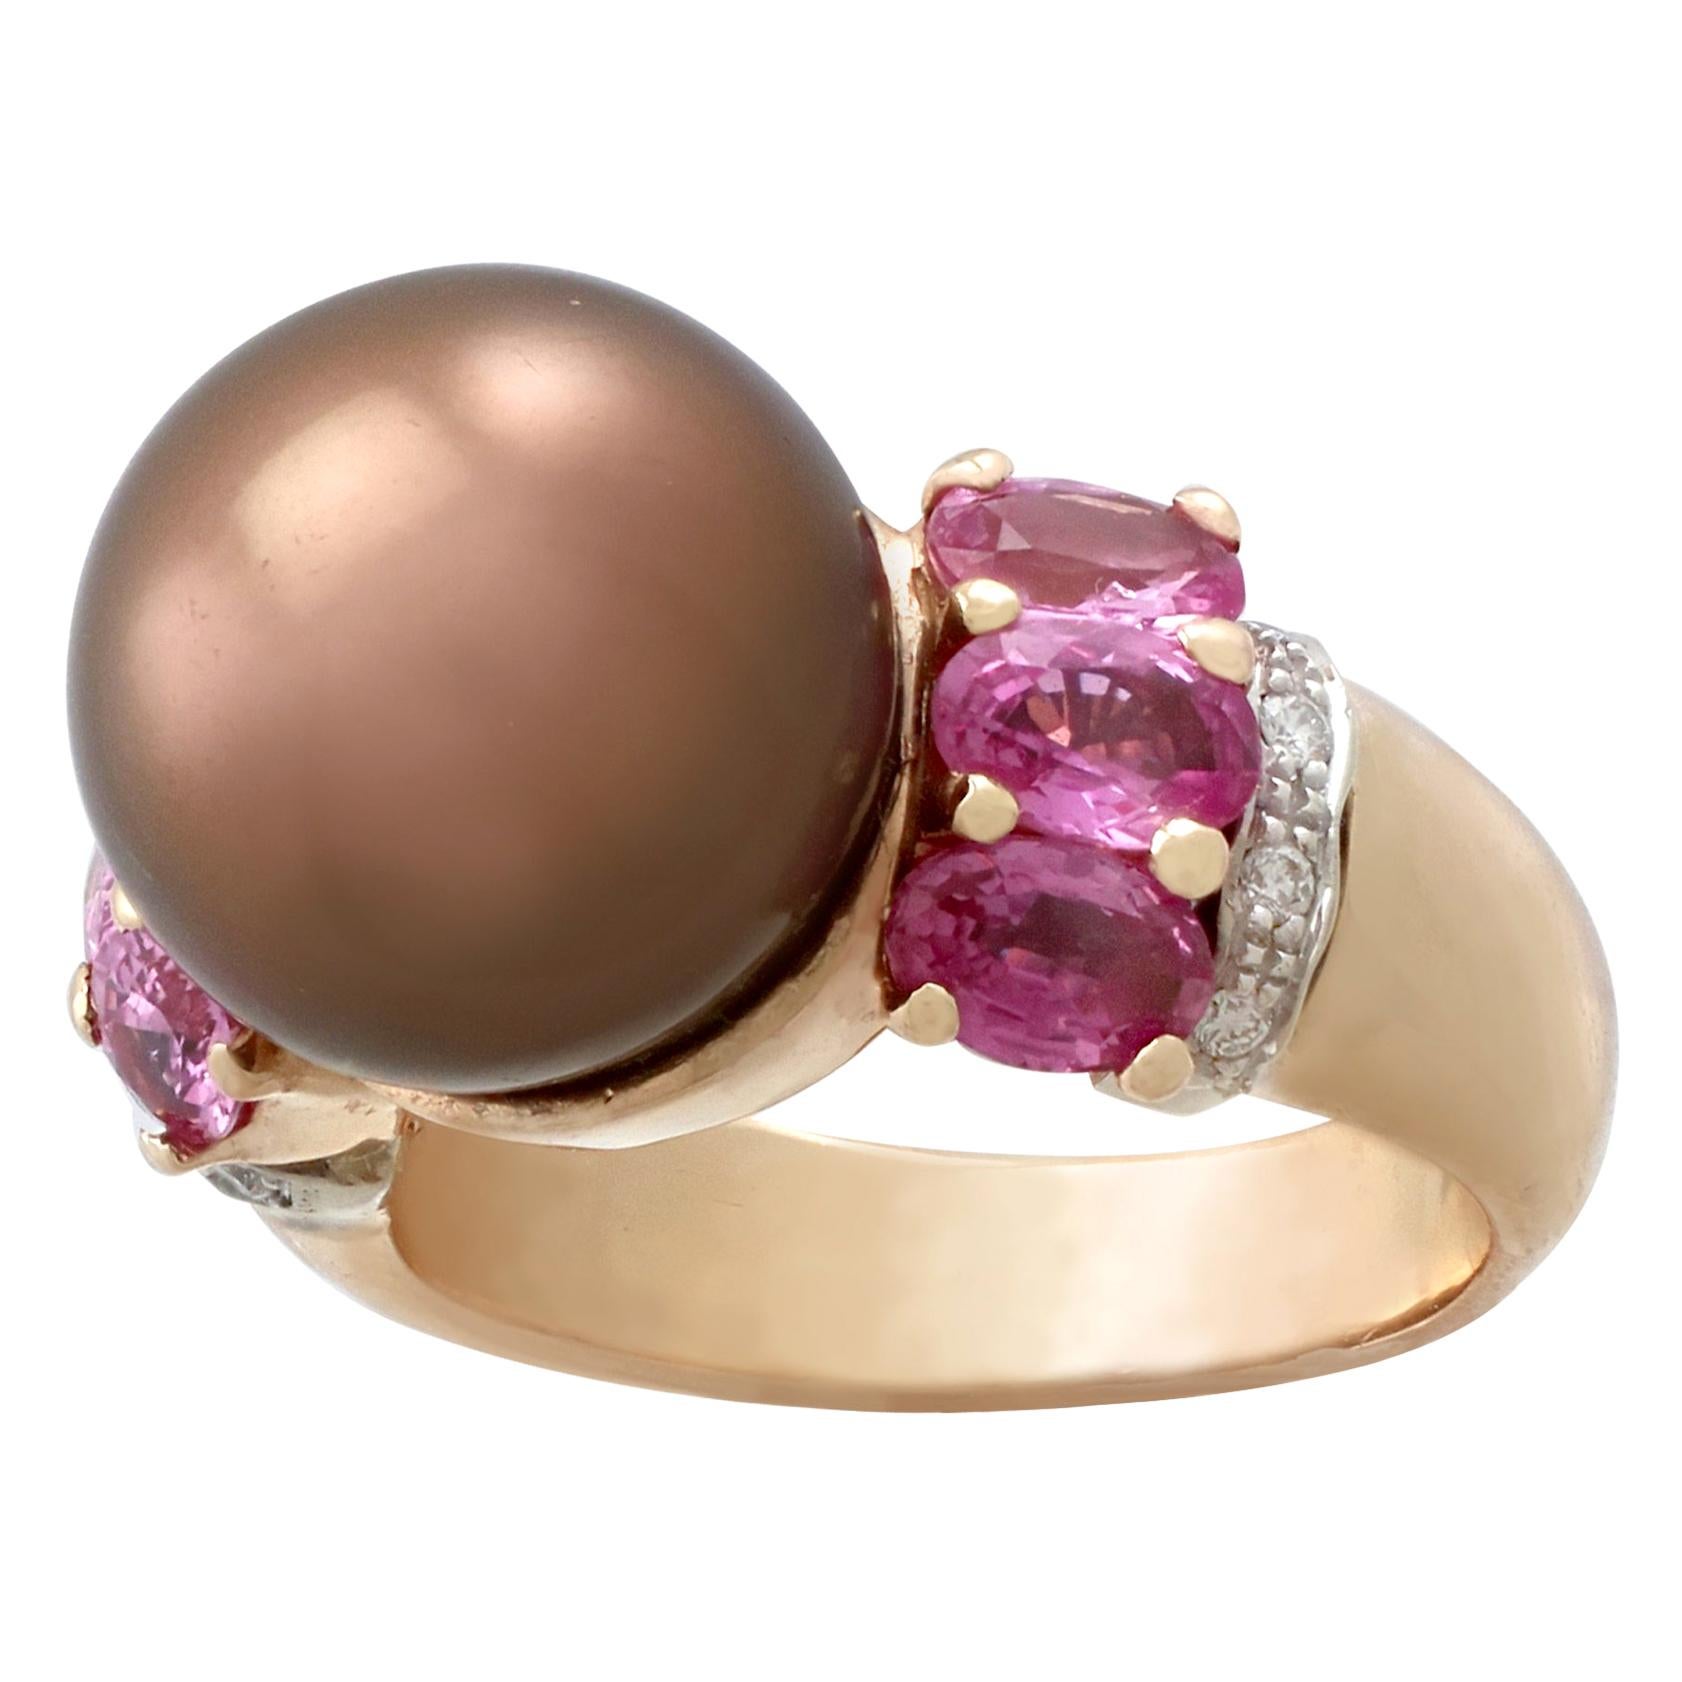 A stunning vintage chocolate pearl and 2.95Ct pink sapphire, 0.08Ct diamond and 18k gold dress ring; part of our diverse vintage jewelry collections.

This stunning, fine and impressive pearl and pink sapphire ring has been crafted in 18k yellow